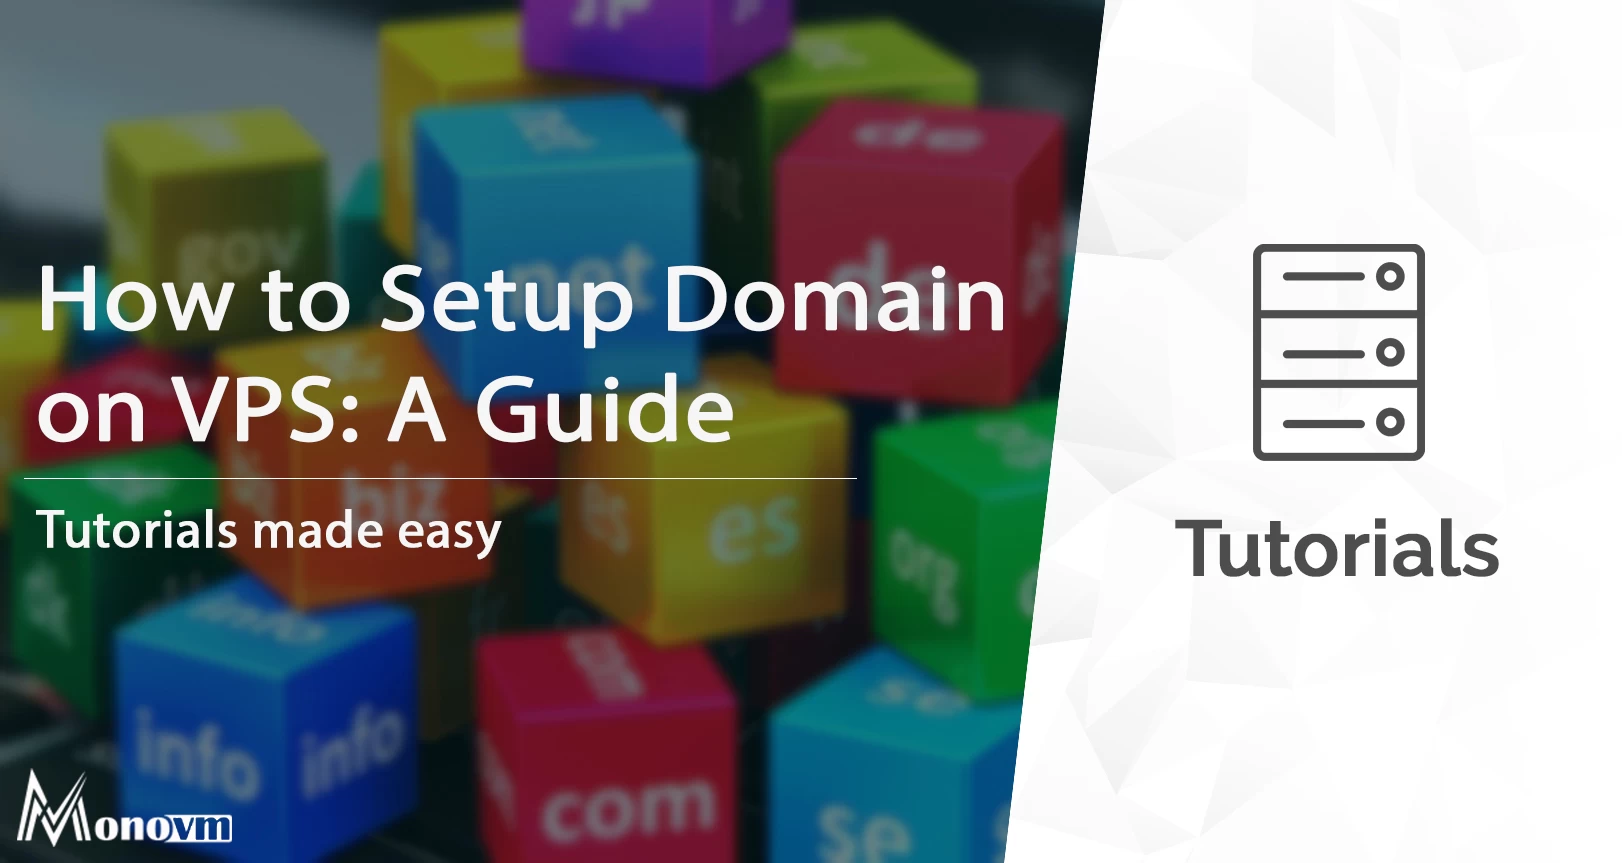 How to Setup Domain on VPS: A Step-by-Step Guide to Hosting Your Website with Ease